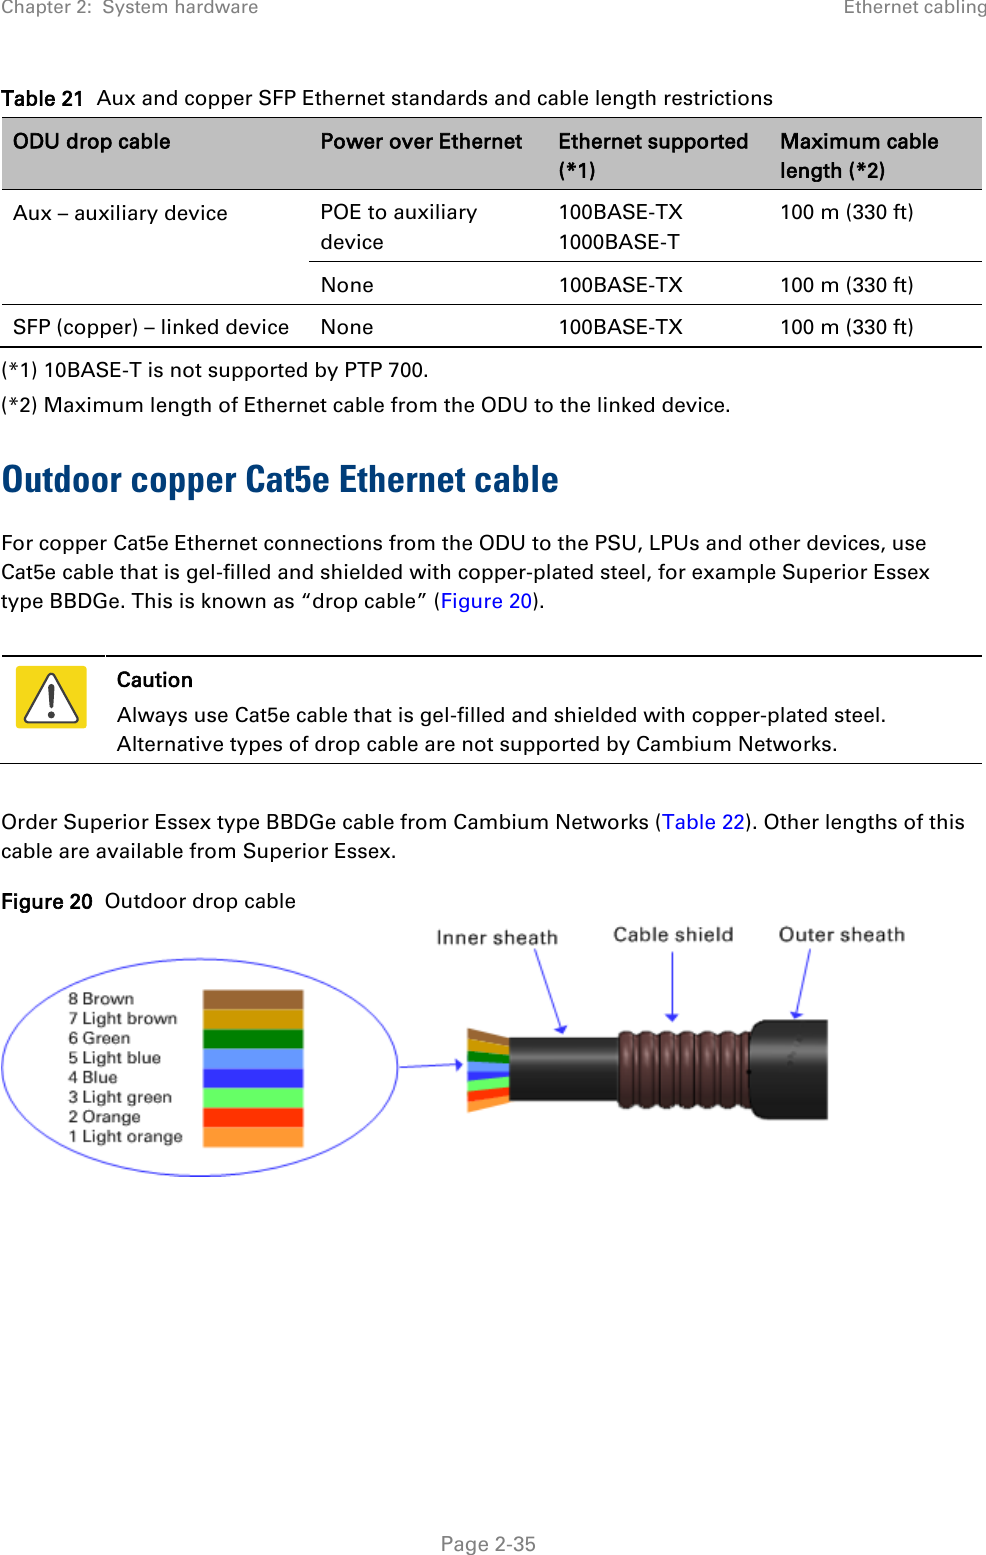 Chapter 2:  System hardware Ethernet cabling  Table 21  Aux and copper SFP Ethernet standards and cable length restrictions ODU drop cable Power over Ethernet Ethernet supported (*1) Maximum cable length (*2) Aux – auxiliary device  POE to auxiliary device 100BASE-TX 1000BASE-T 100 m (330 ft) None 100BASE-TX 100 m (330 ft) SFP (copper) – linked device None 100BASE-TX 100 m (330 ft) (*1) 10BASE-T is not supported by PTP 700.  (*2) Maximum length of Ethernet cable from the ODU to the linked device. Outdoor copper Cat5e Ethernet cable For copper Cat5e Ethernet connections from the ODU to the PSU, LPUs and other devices, use Cat5e cable that is gel-filled and shielded with copper-plated steel, for example Superior Essex  type BBDGe. This is known as “drop cable” (Figure 20).   Caution Always use Cat5e cable that is gel-filled and shielded with copper-plated steel. Alternative types of drop cable are not supported by Cambium Networks.  Order Superior Essex type BBDGe cable from Cambium Networks (Table 22). Other lengths of this cable are available from Superior Essex. Figure 20  Outdoor drop cable      Page 2-35 